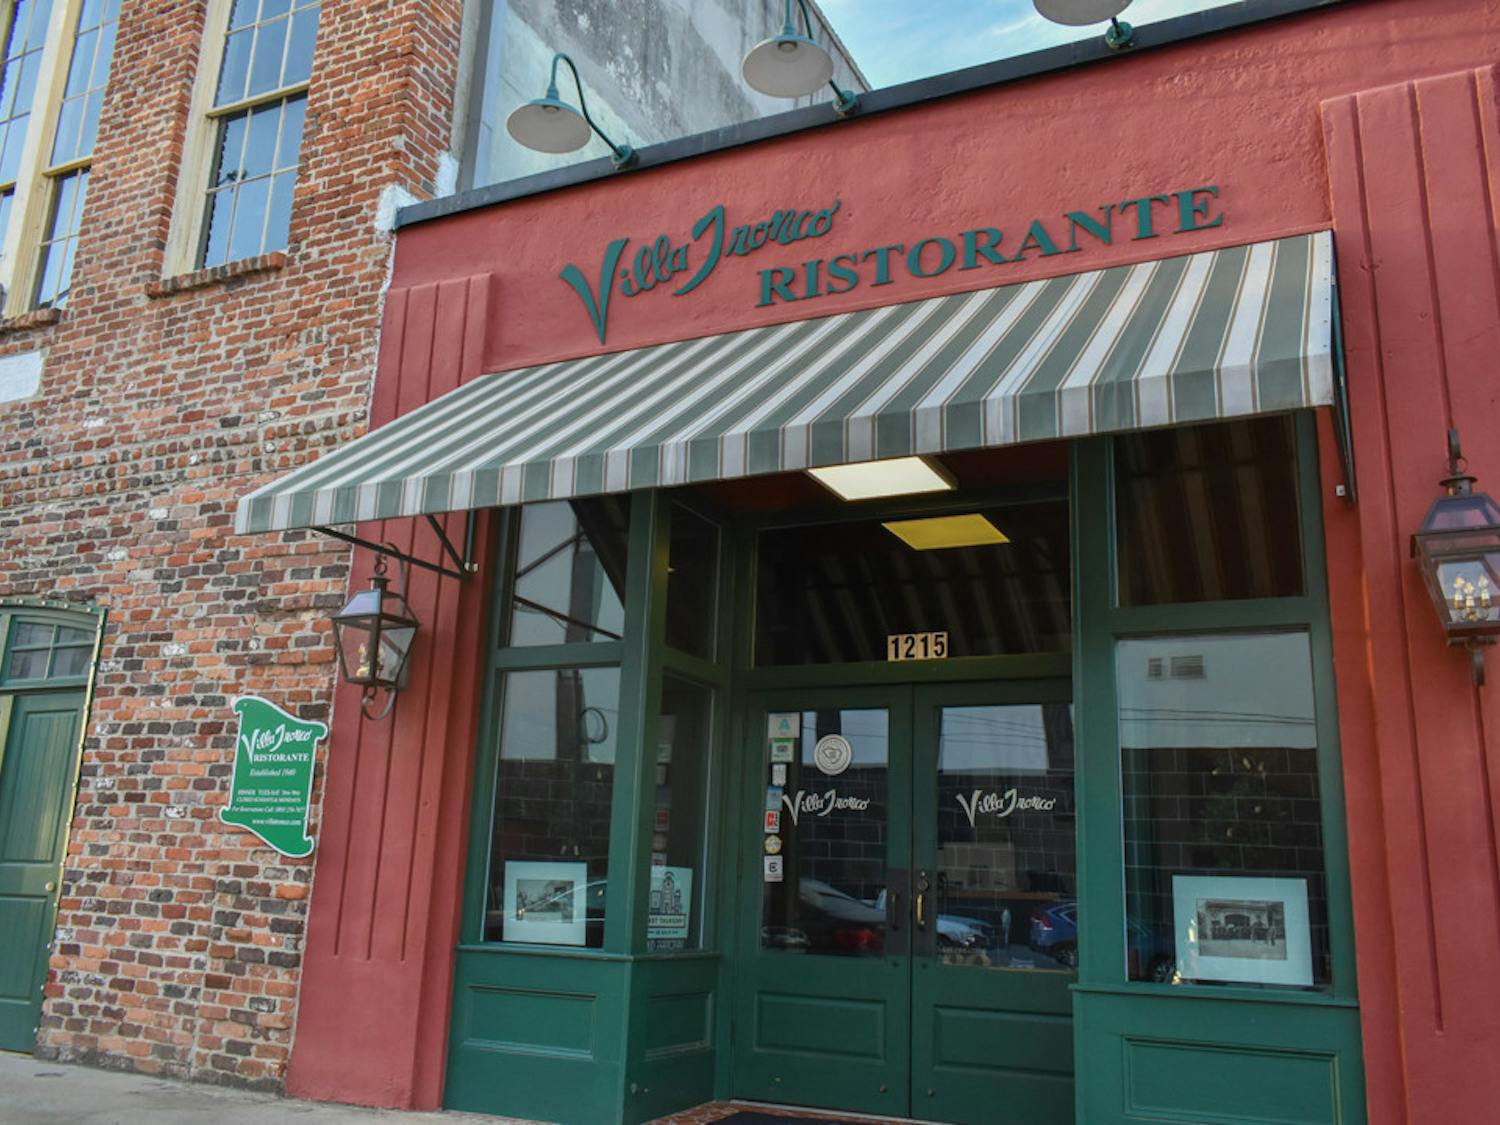 Villa Tronco Italian Restaurant, which opened over 80 years ago, is located in Downtown Columbia, S.C. The Tronco family has owned the restaurant for generations, making it a family establishment.